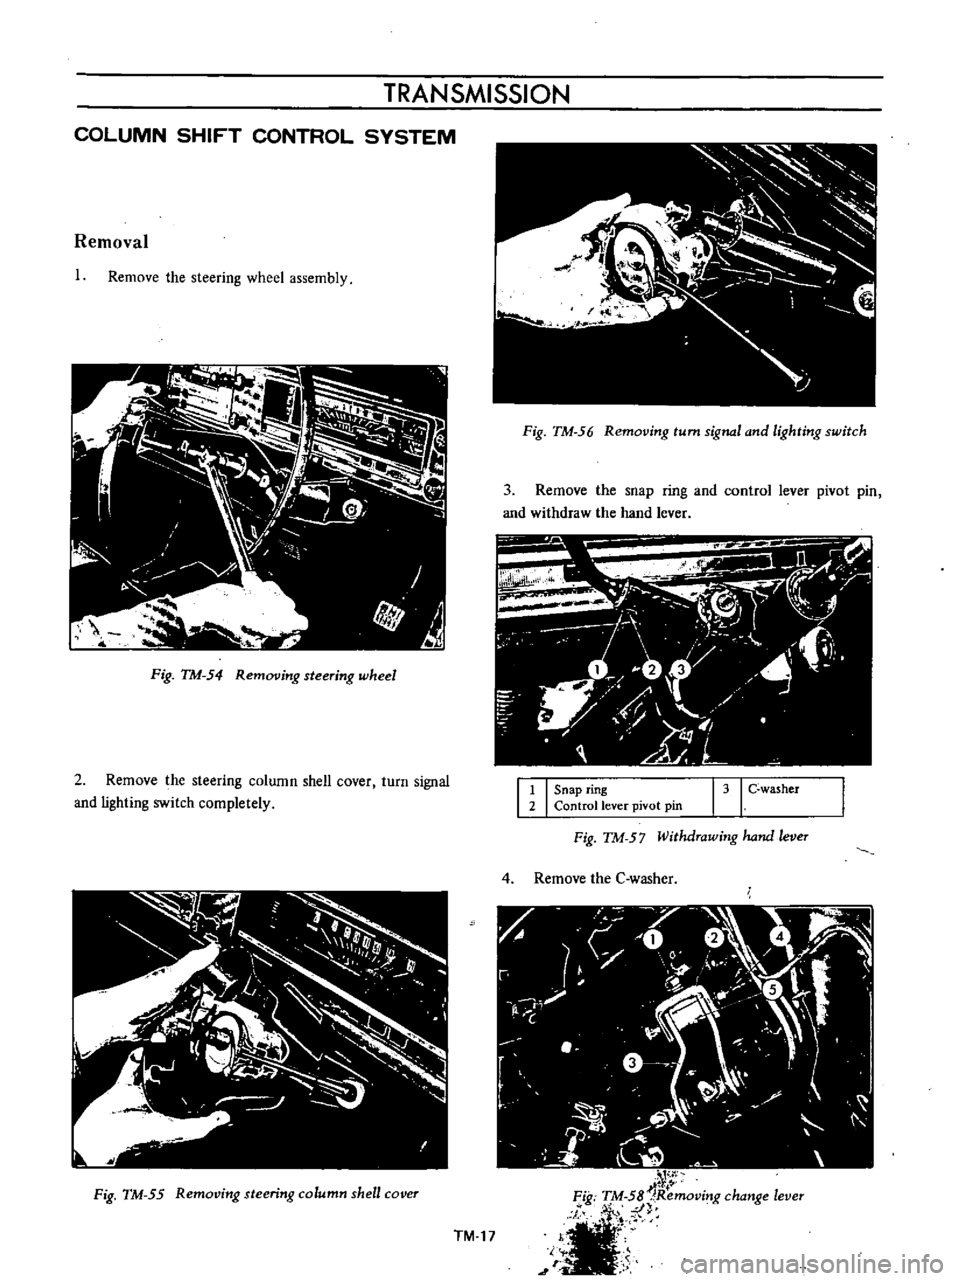 DATSUN B110 1973  Service Manual PDF 
TRANSMISSION

COLUMN 
SHIFT 
CONTROL 
SYSTEM

Removal

Remove 
the

steering 
wheel

assembly

Fig 
TM 
54 
Rem01

ing 
steering 
wheel

2 
Remove 
the

steering 
column 
shell 
cover 
turn

signal

